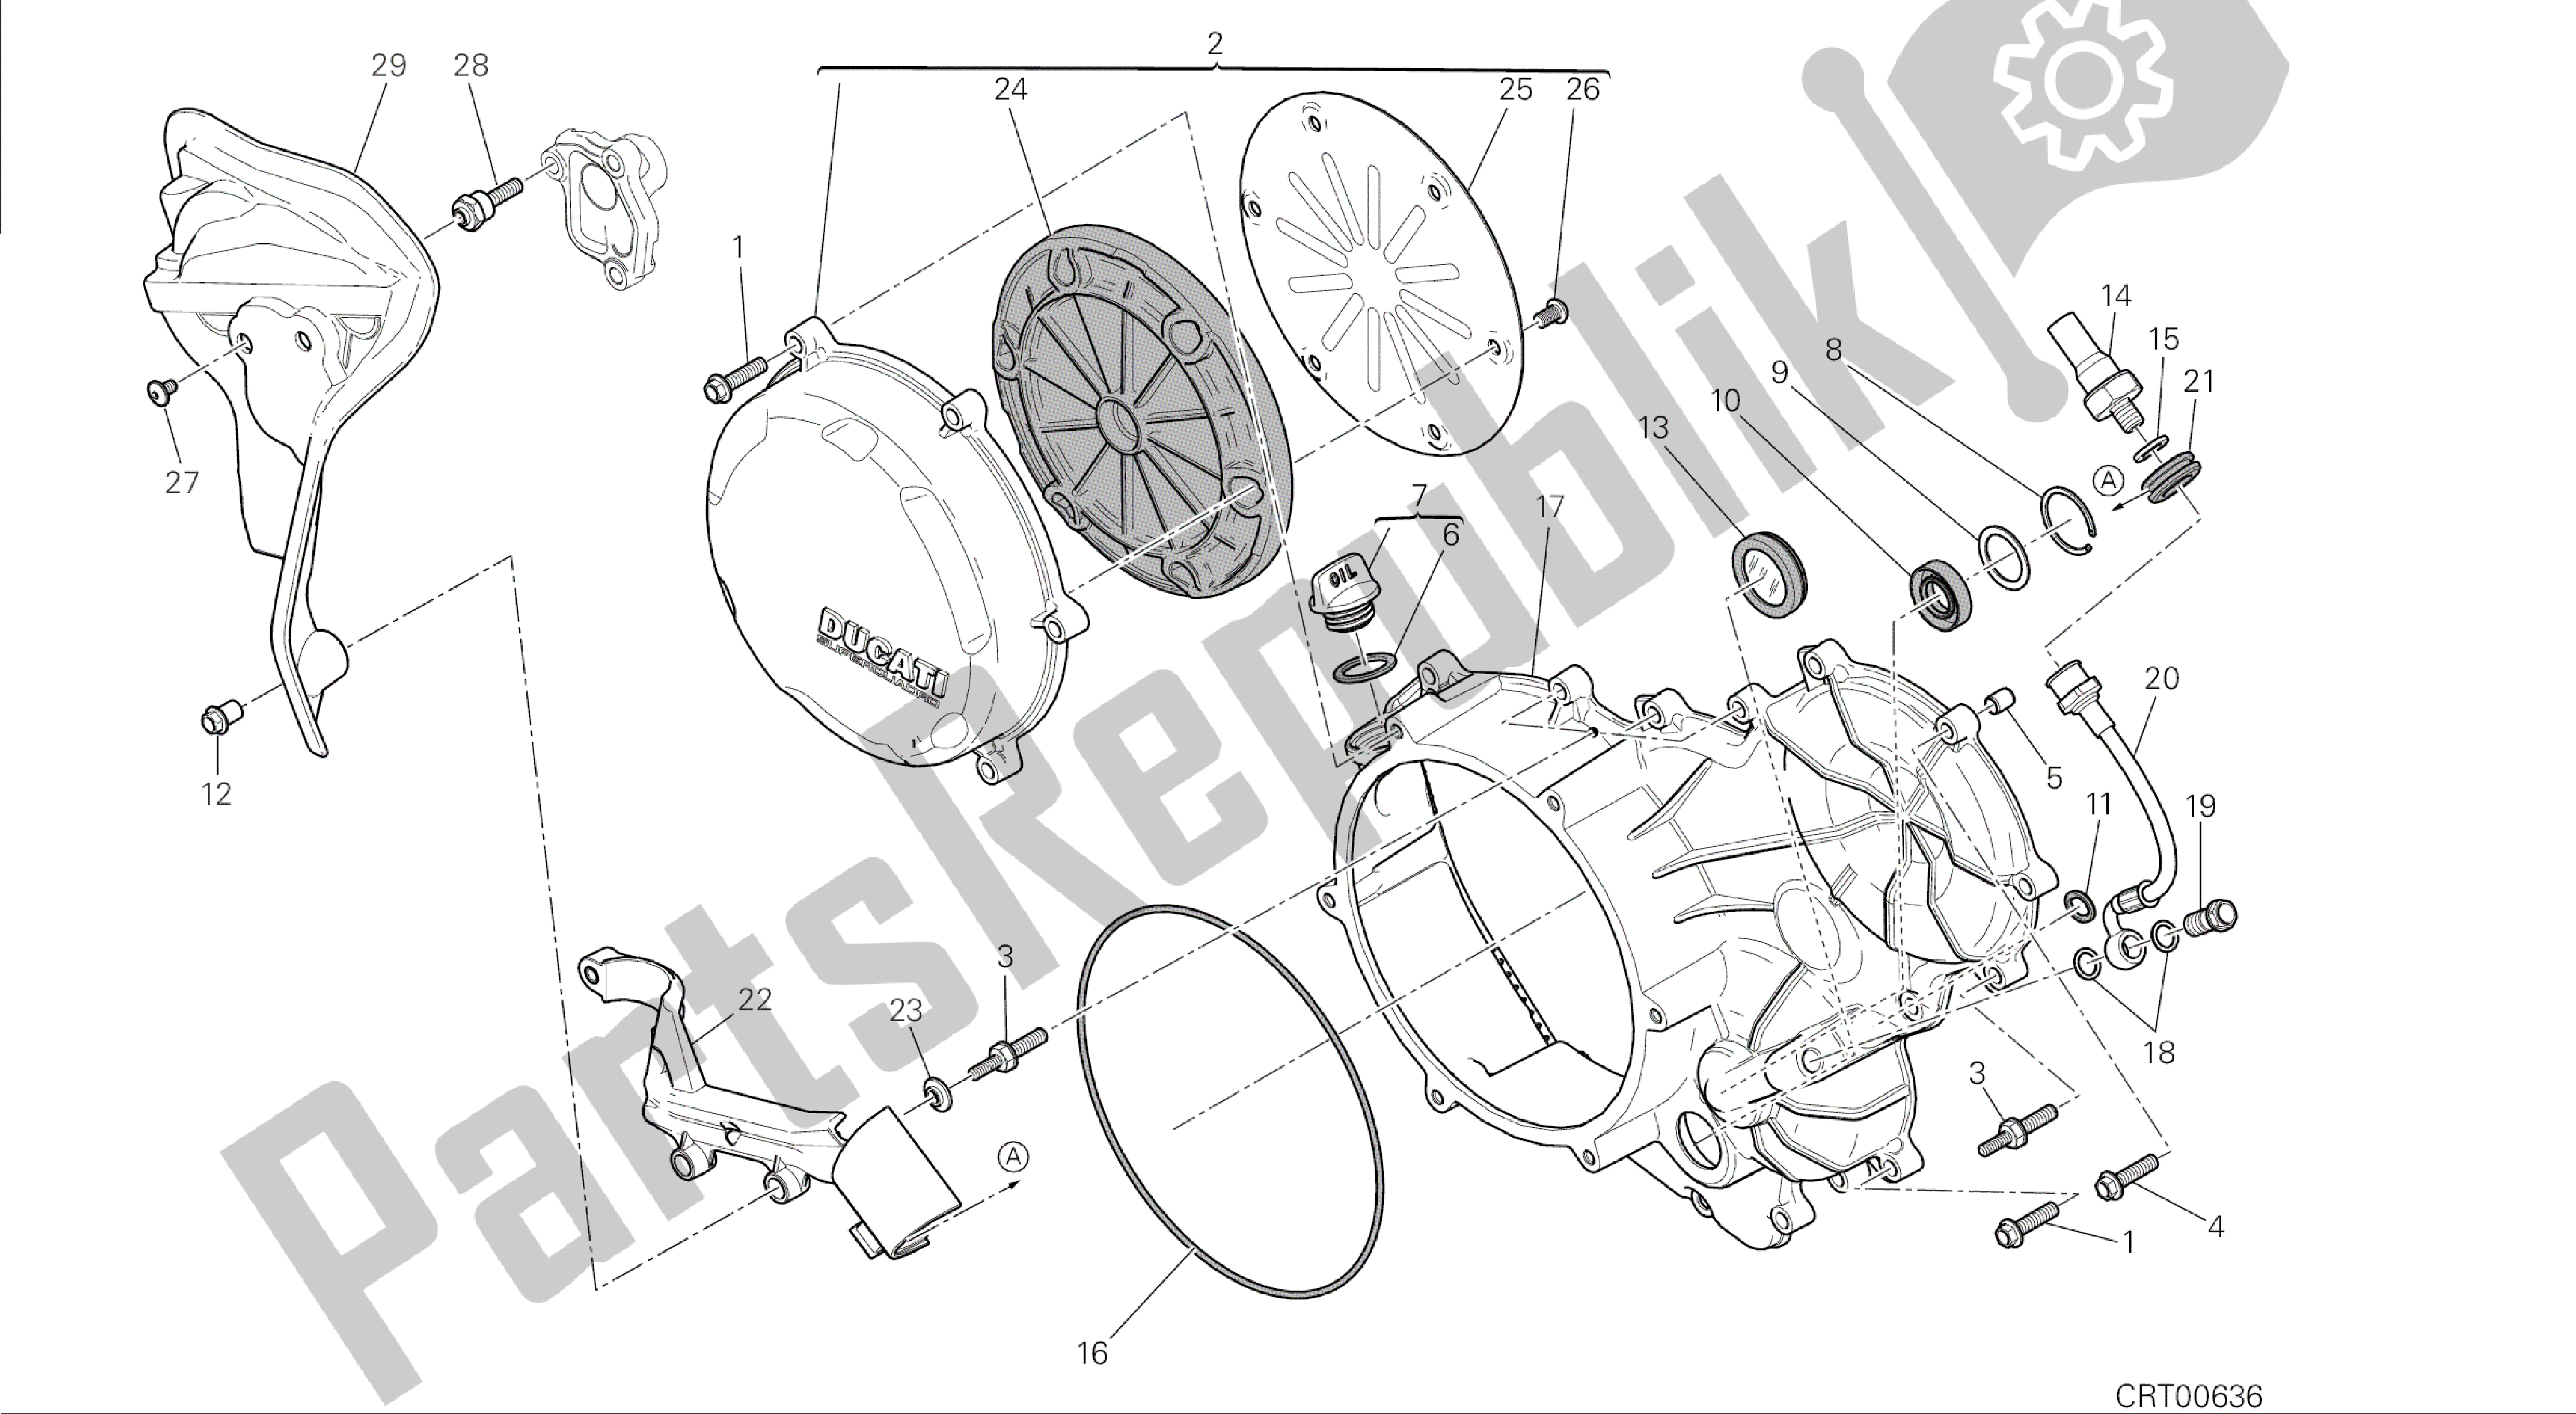 All parts for the Drawing 005 - Clutch - Side Crankcase Cover [mod:1199abs;xst:aus,bra,chn,eur,fra]group Engine of the Ducati Panigale ABS 1199 2014